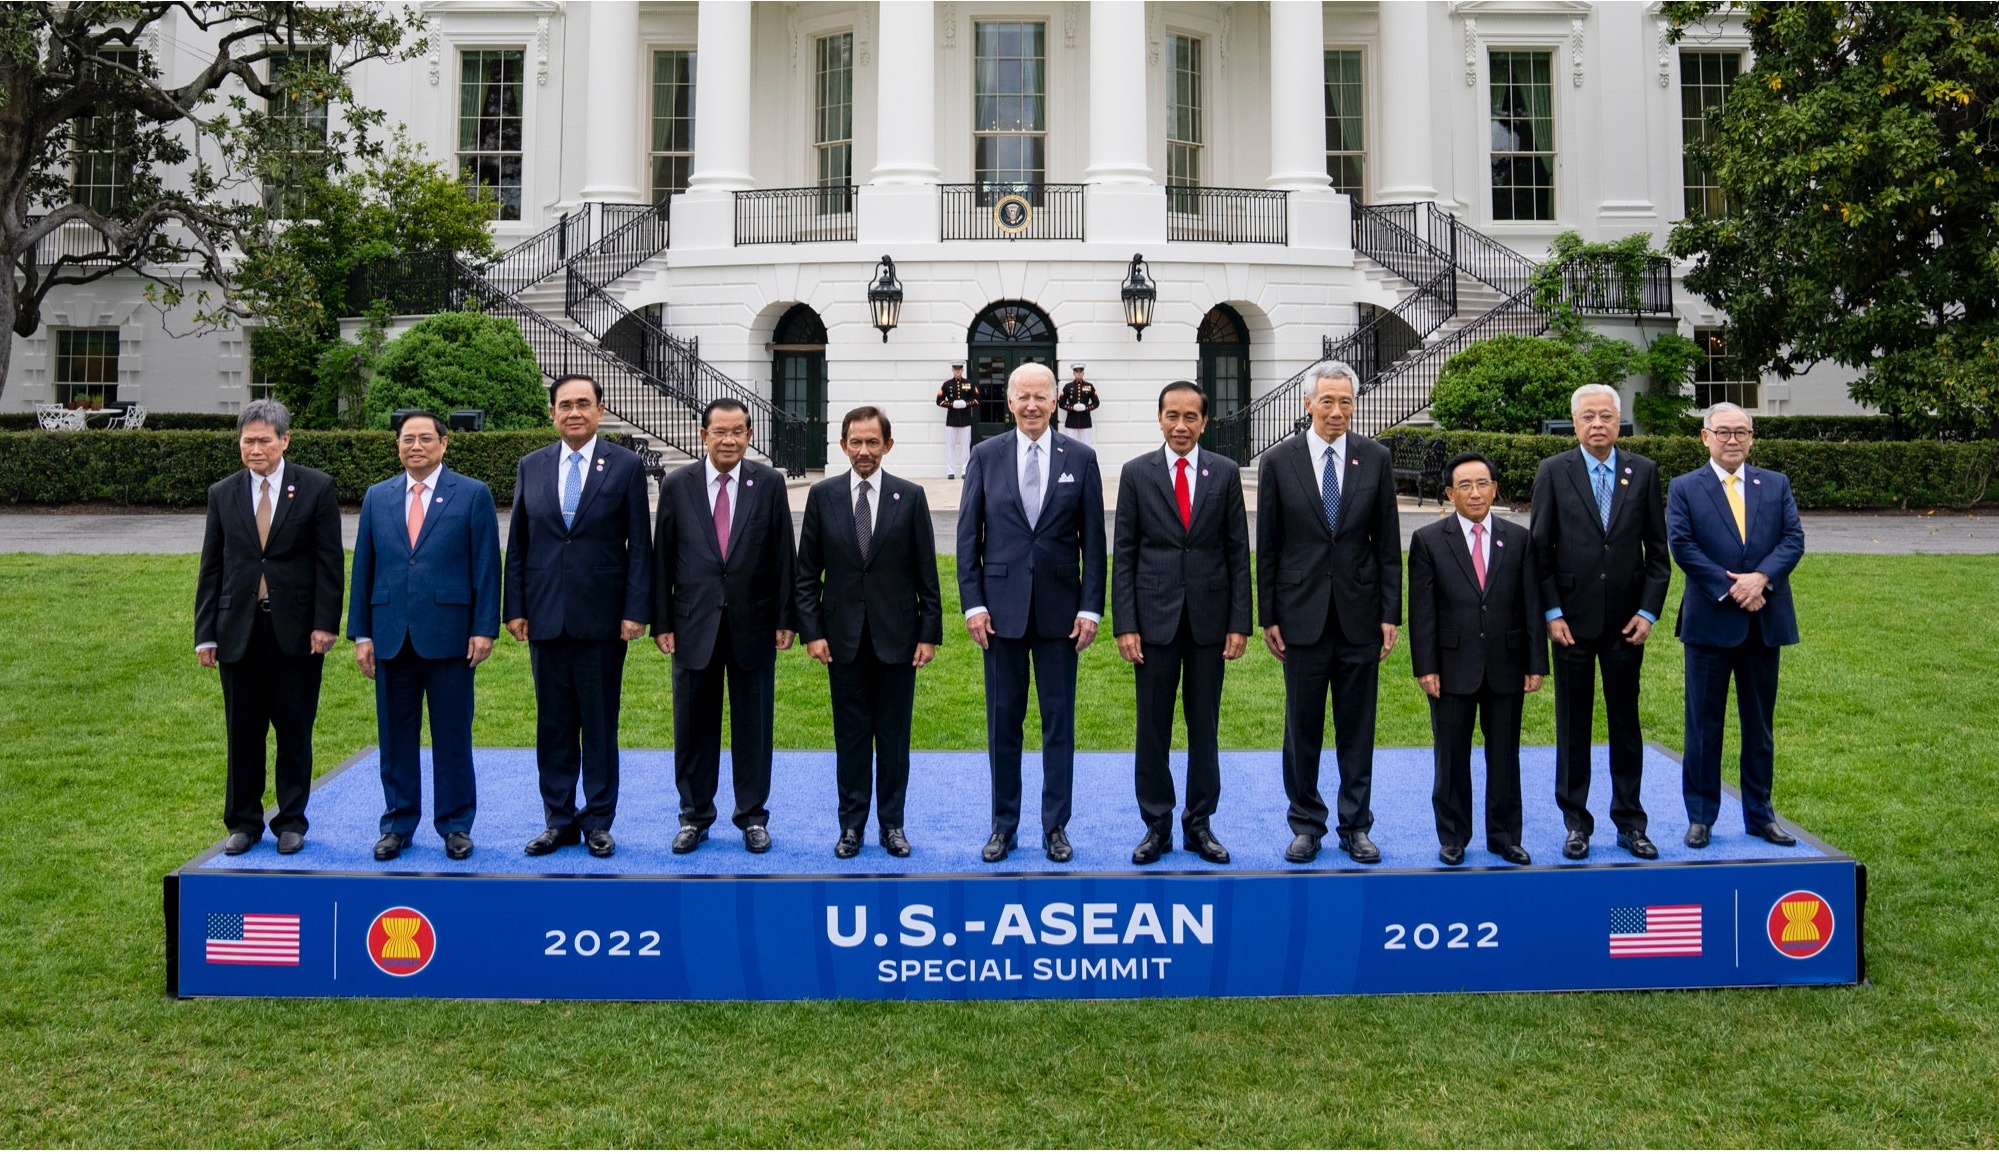 The United States: An Increasingly Incidental Provider of Regional Stability in the Asia-Pacific?